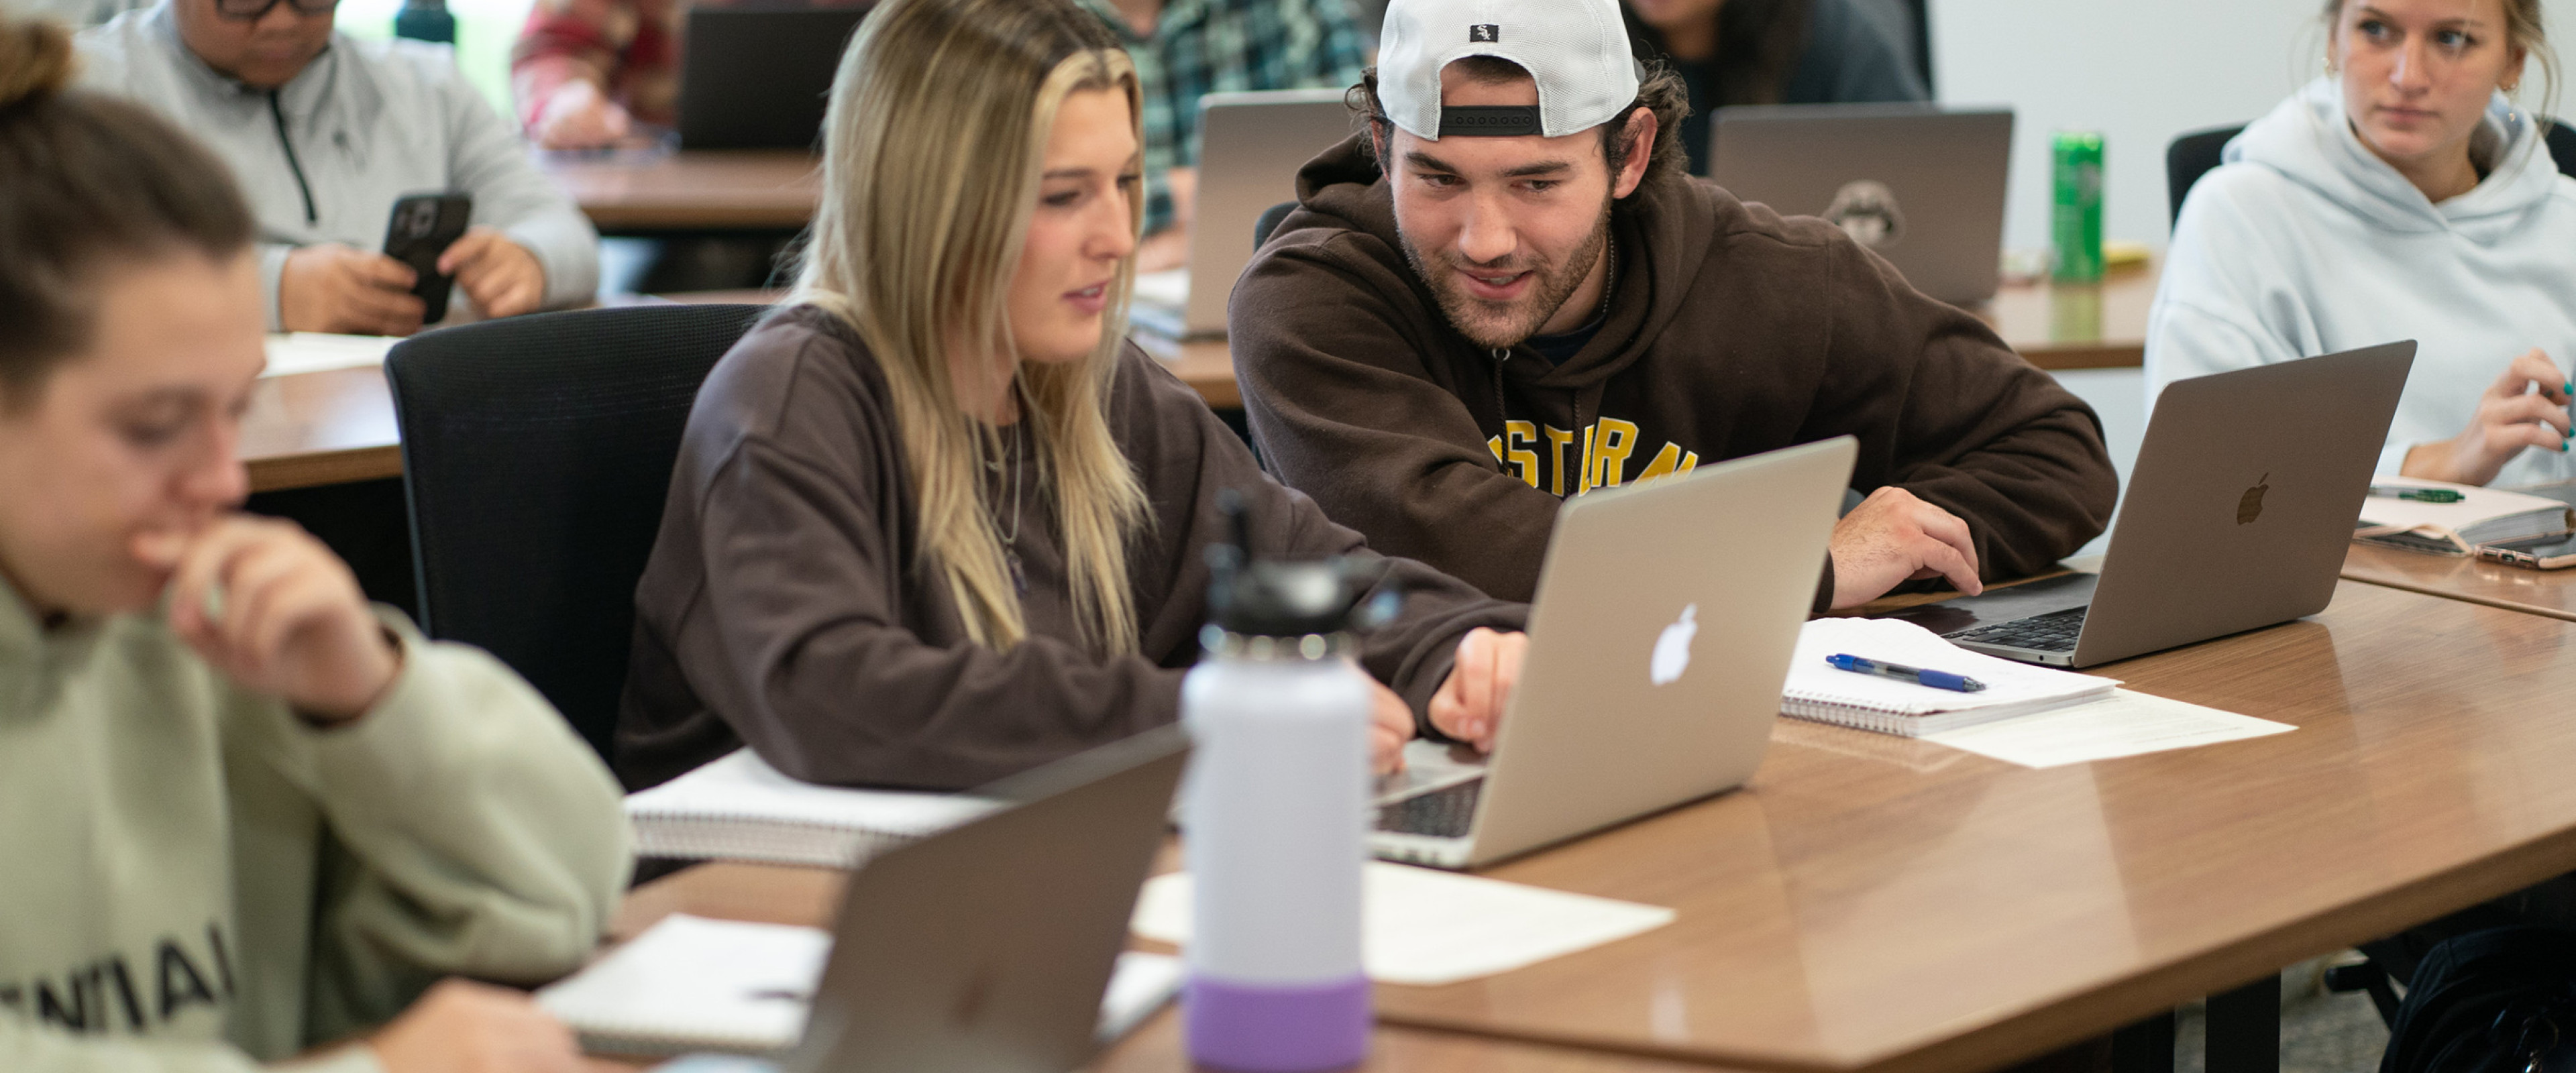 Photo of students working together in a marketing class